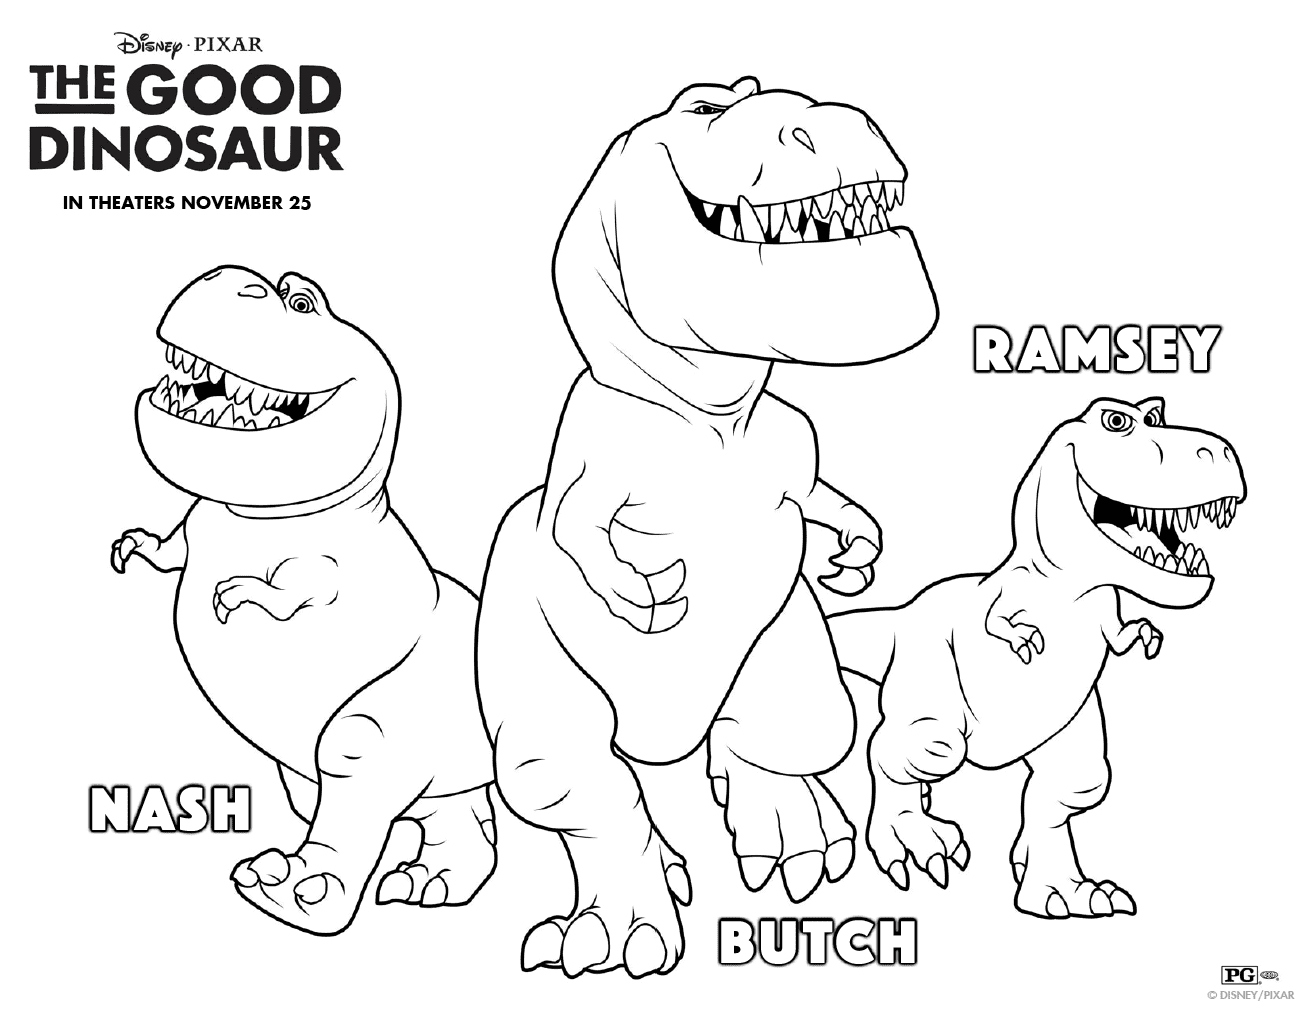 Nash, Butch and Ramsey from The Good Dinosaur Coloring Page